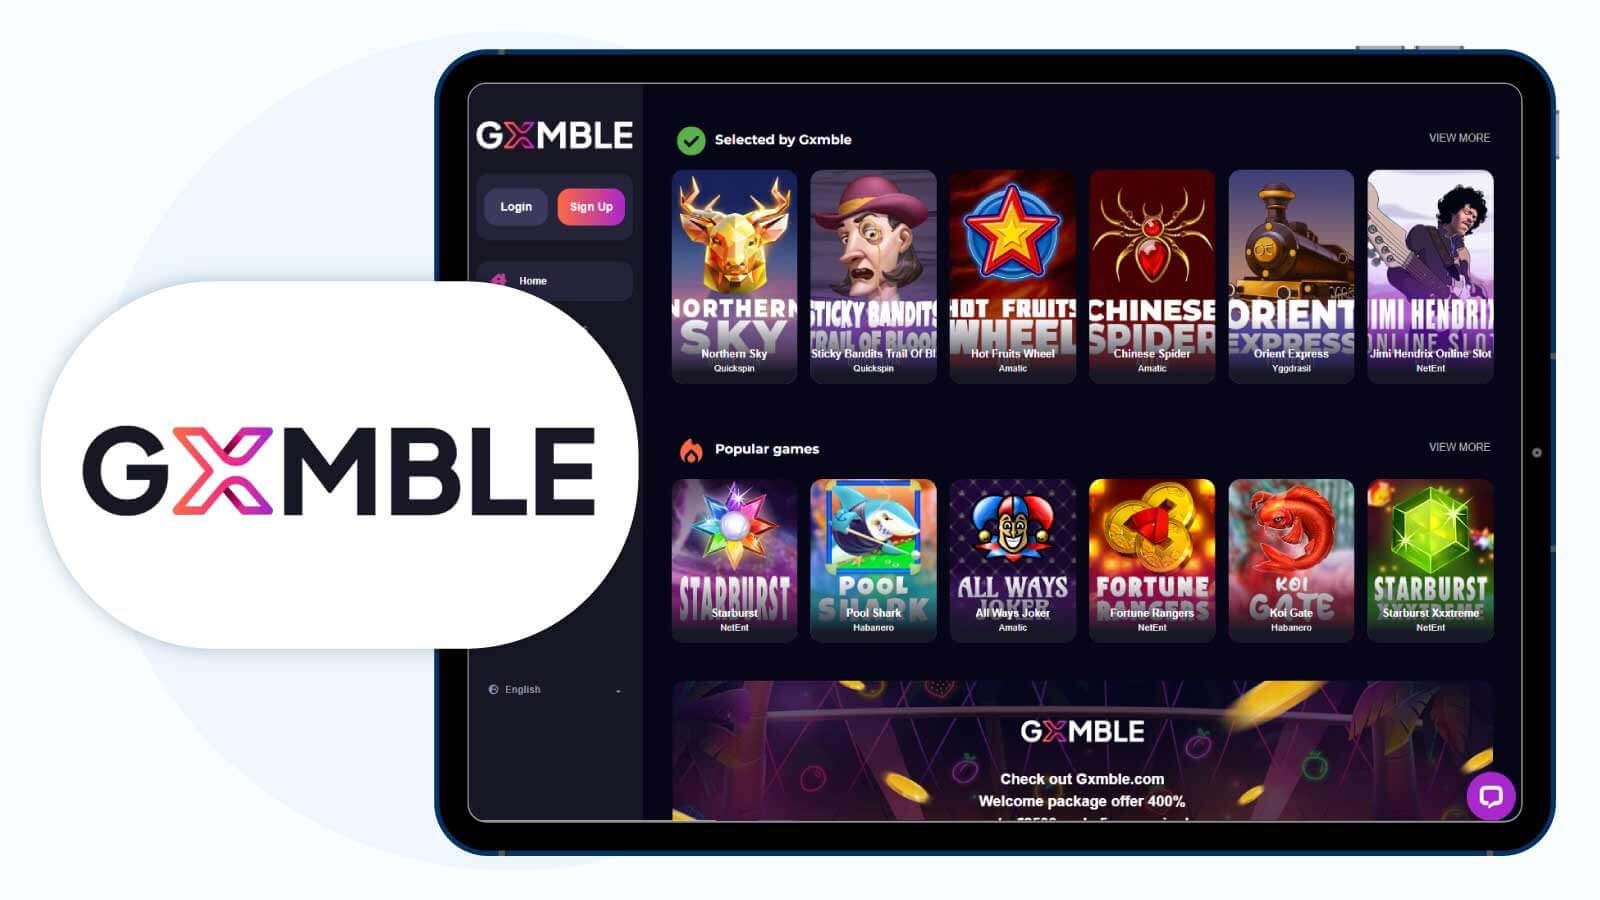 Gxmbe Casino Outstanding New Online Casino for Low Wagering Bonuses